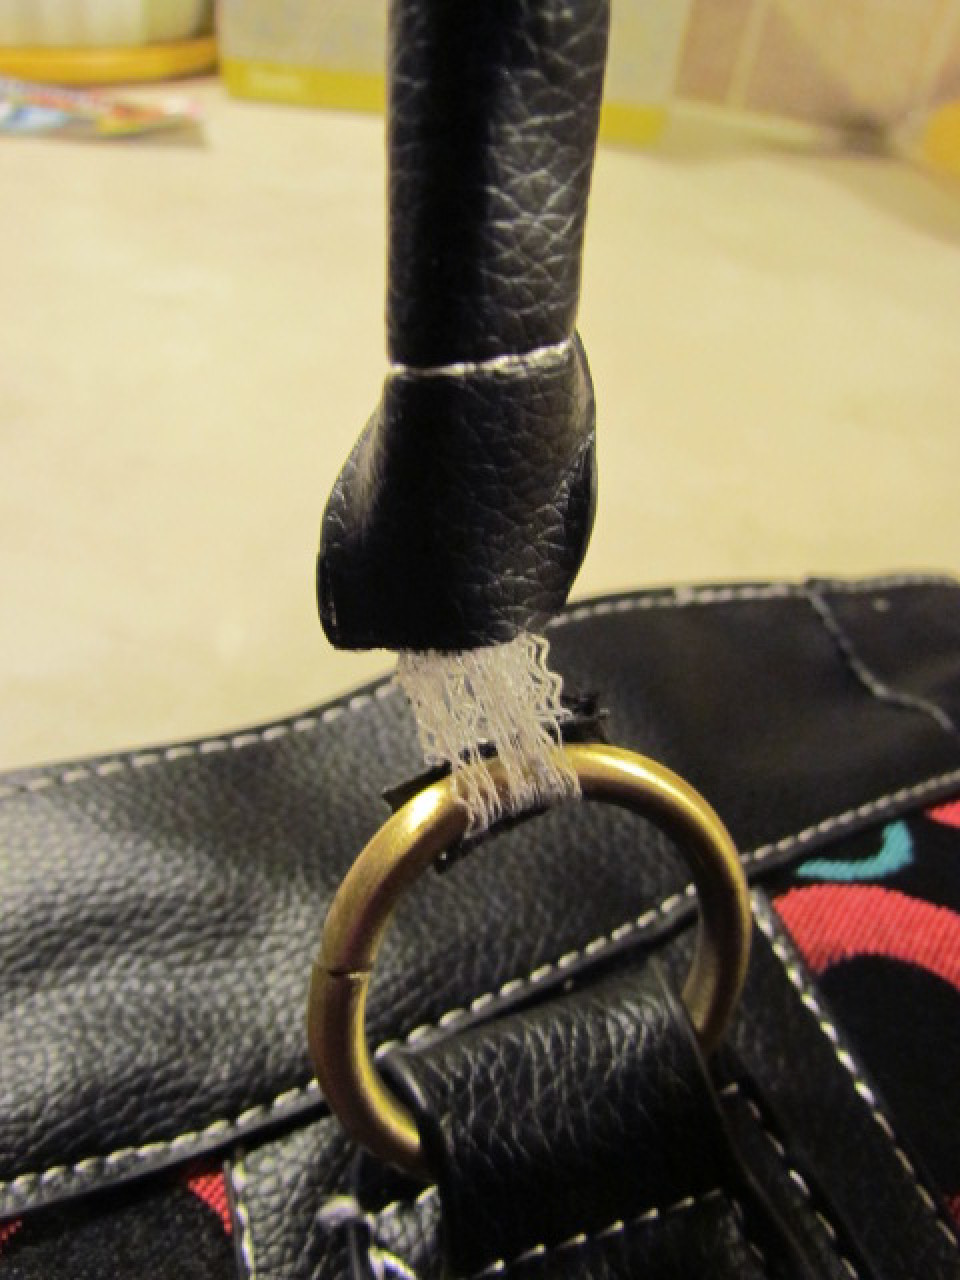 How to Fix Fraying Handbag Straps and Handles - Lollipuff